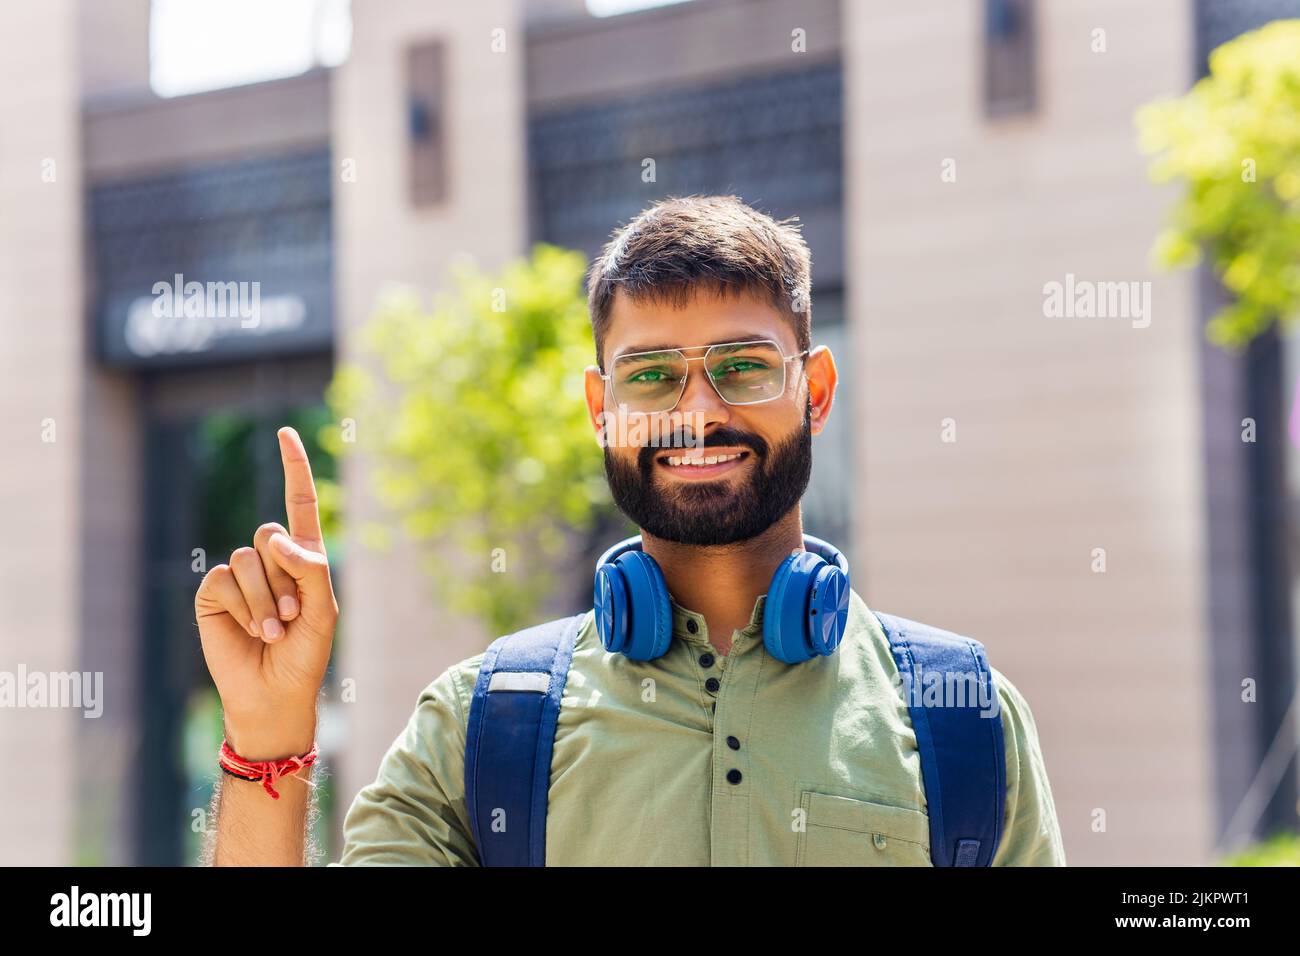 student looking happy and showing friendly gesture outdoors Stock Photo